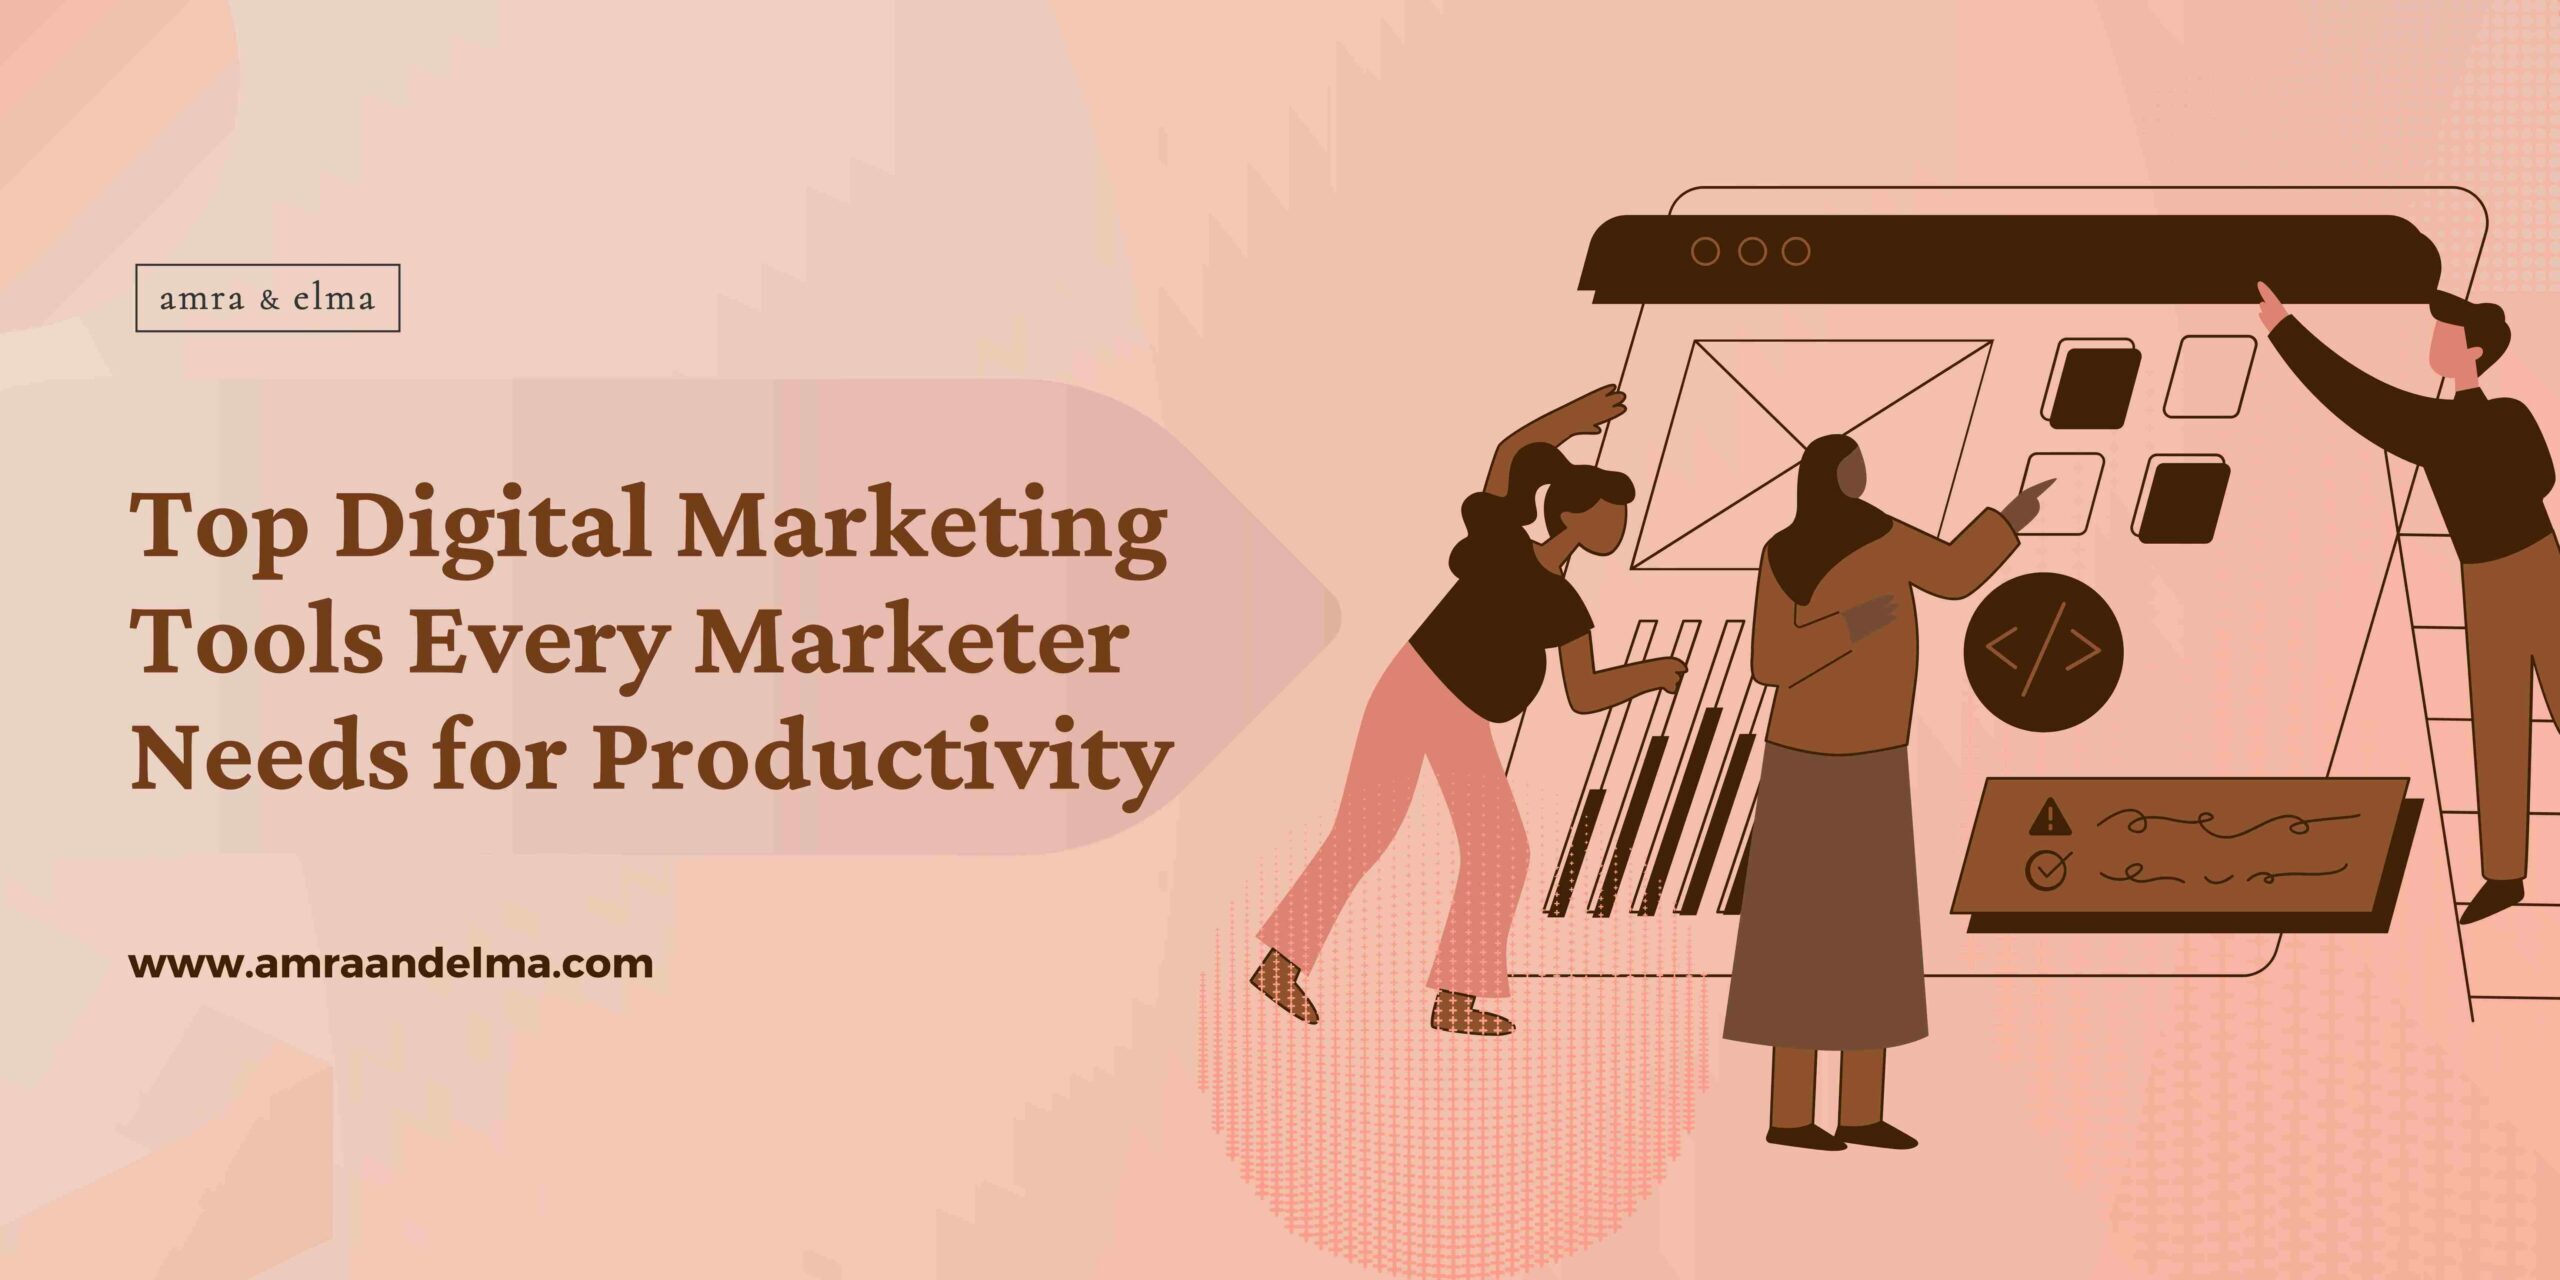 Top Digital Marketing Tools Every Marketer Needs for Productivity